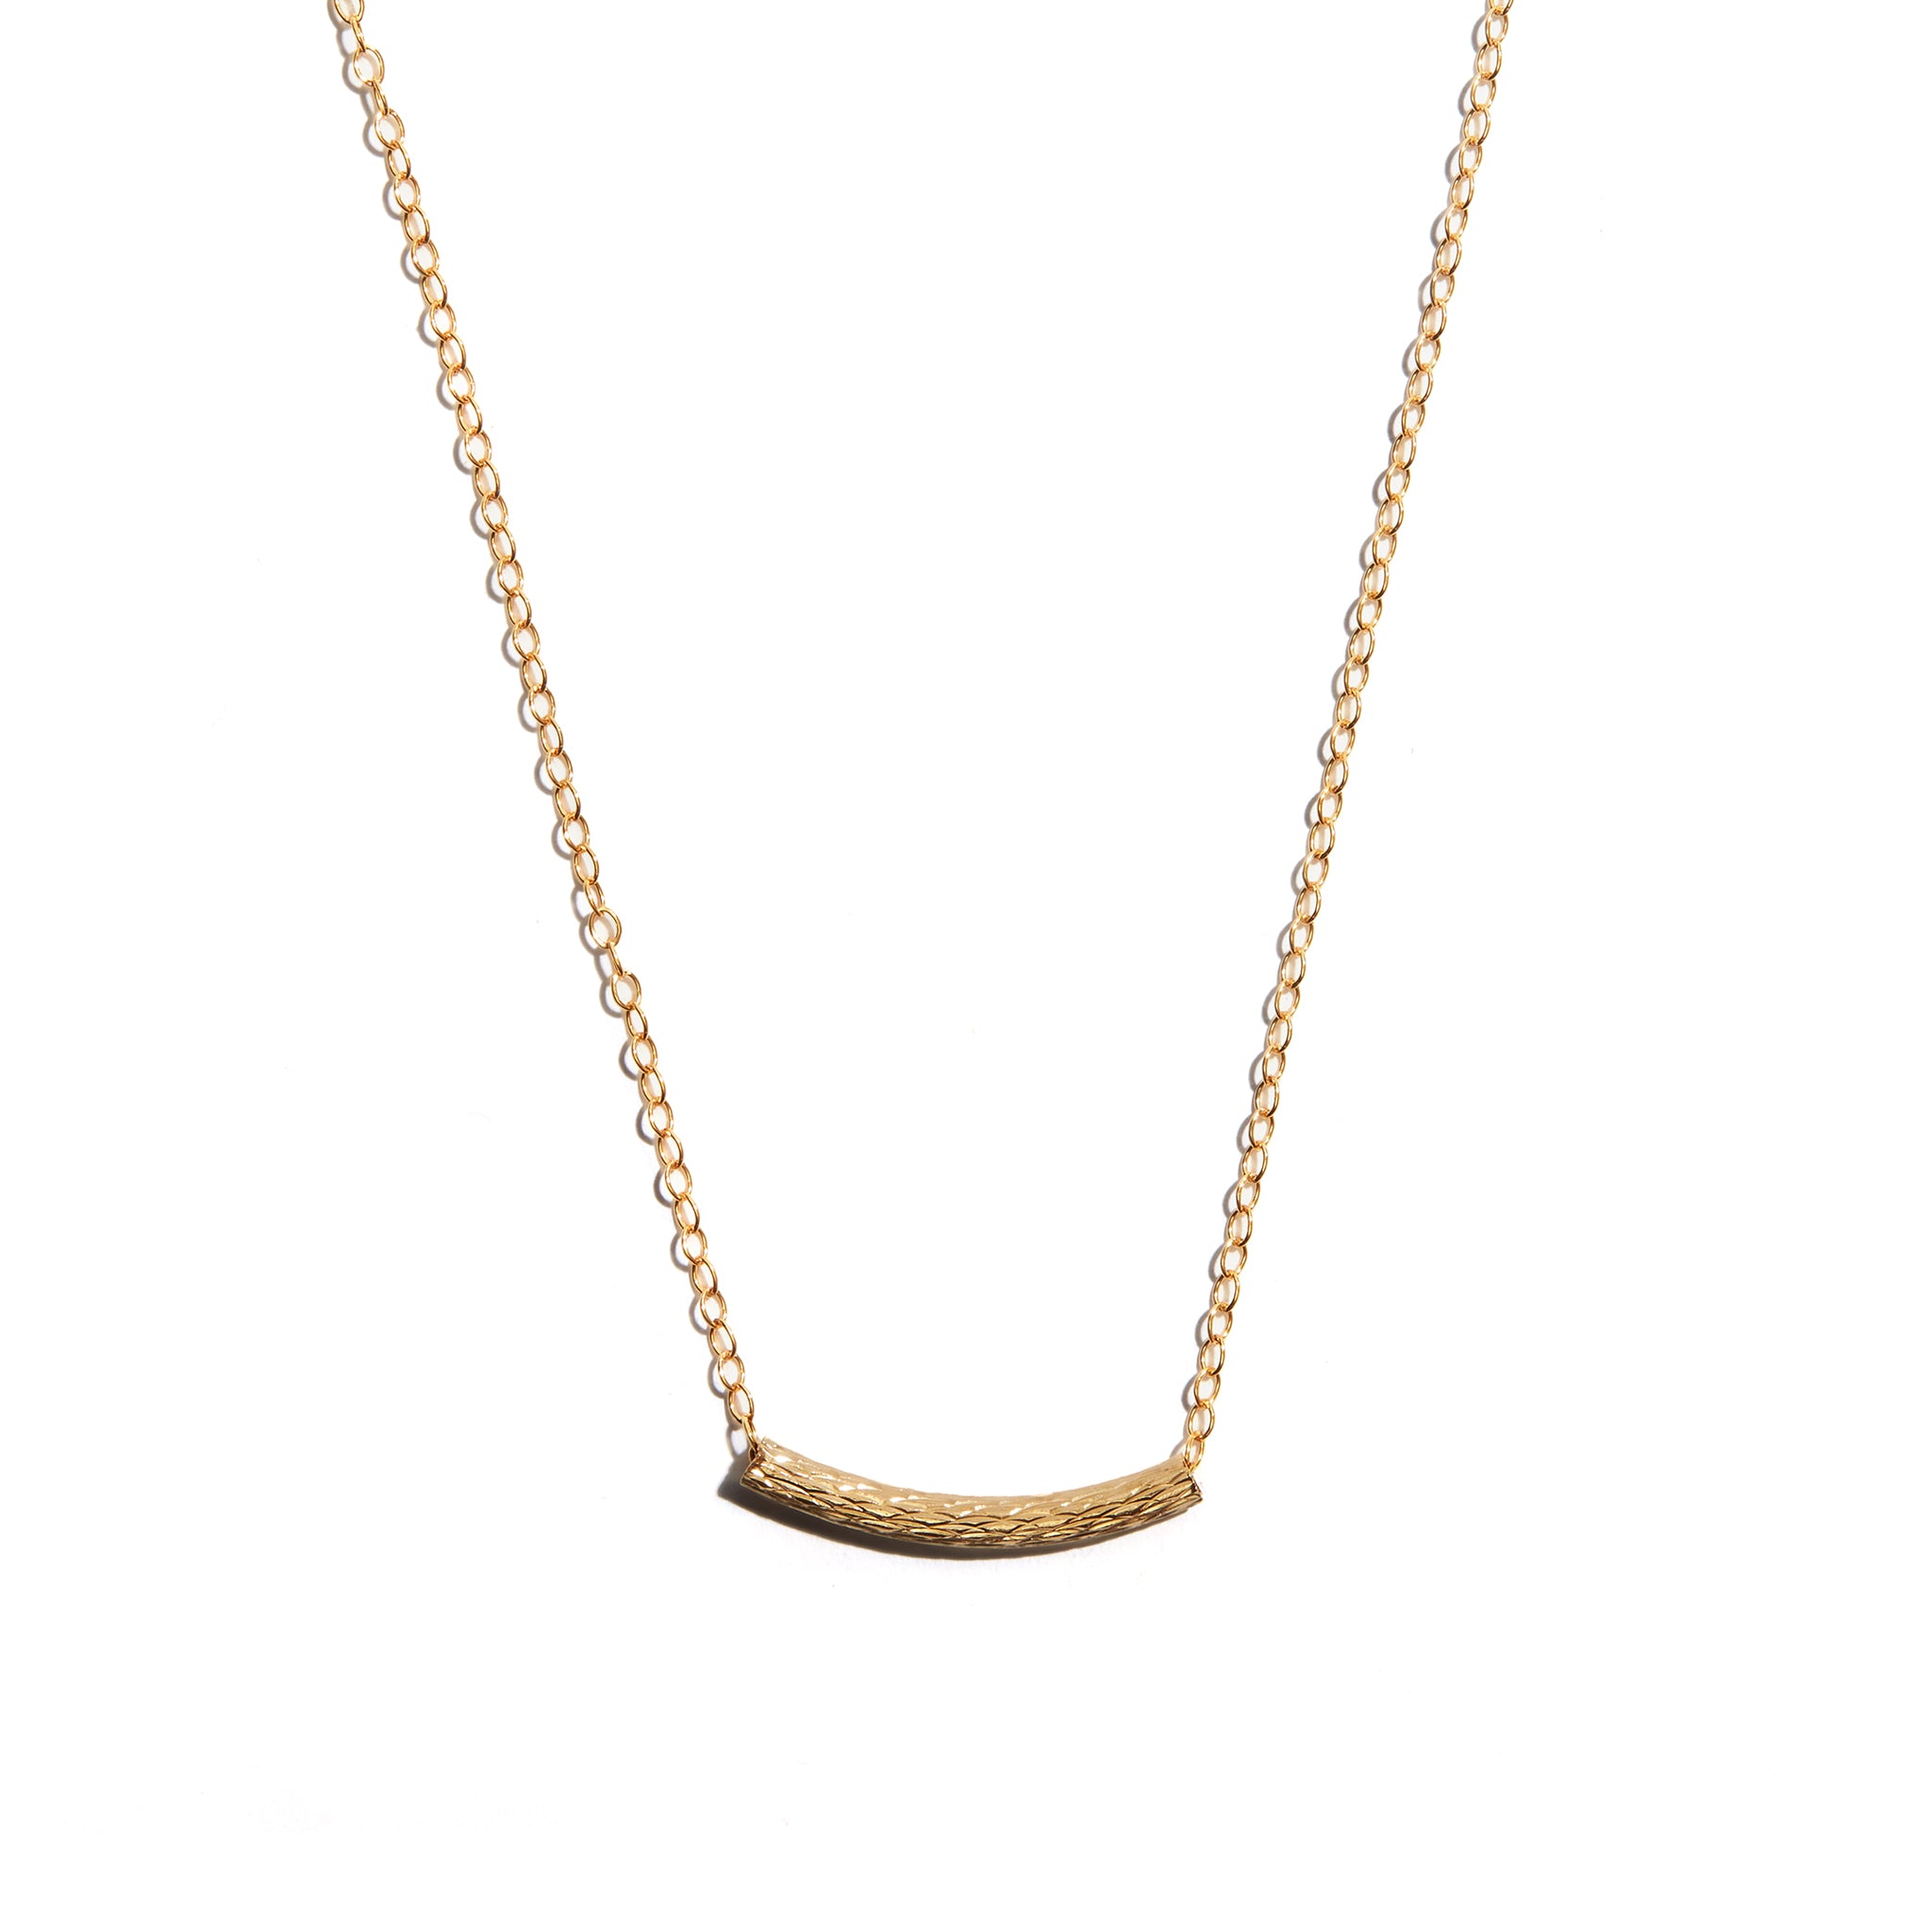 Stunning Seoidín Sparkle Bar Necklace crafted from 14 carat gold-fill, radiating elegance and sophistication.